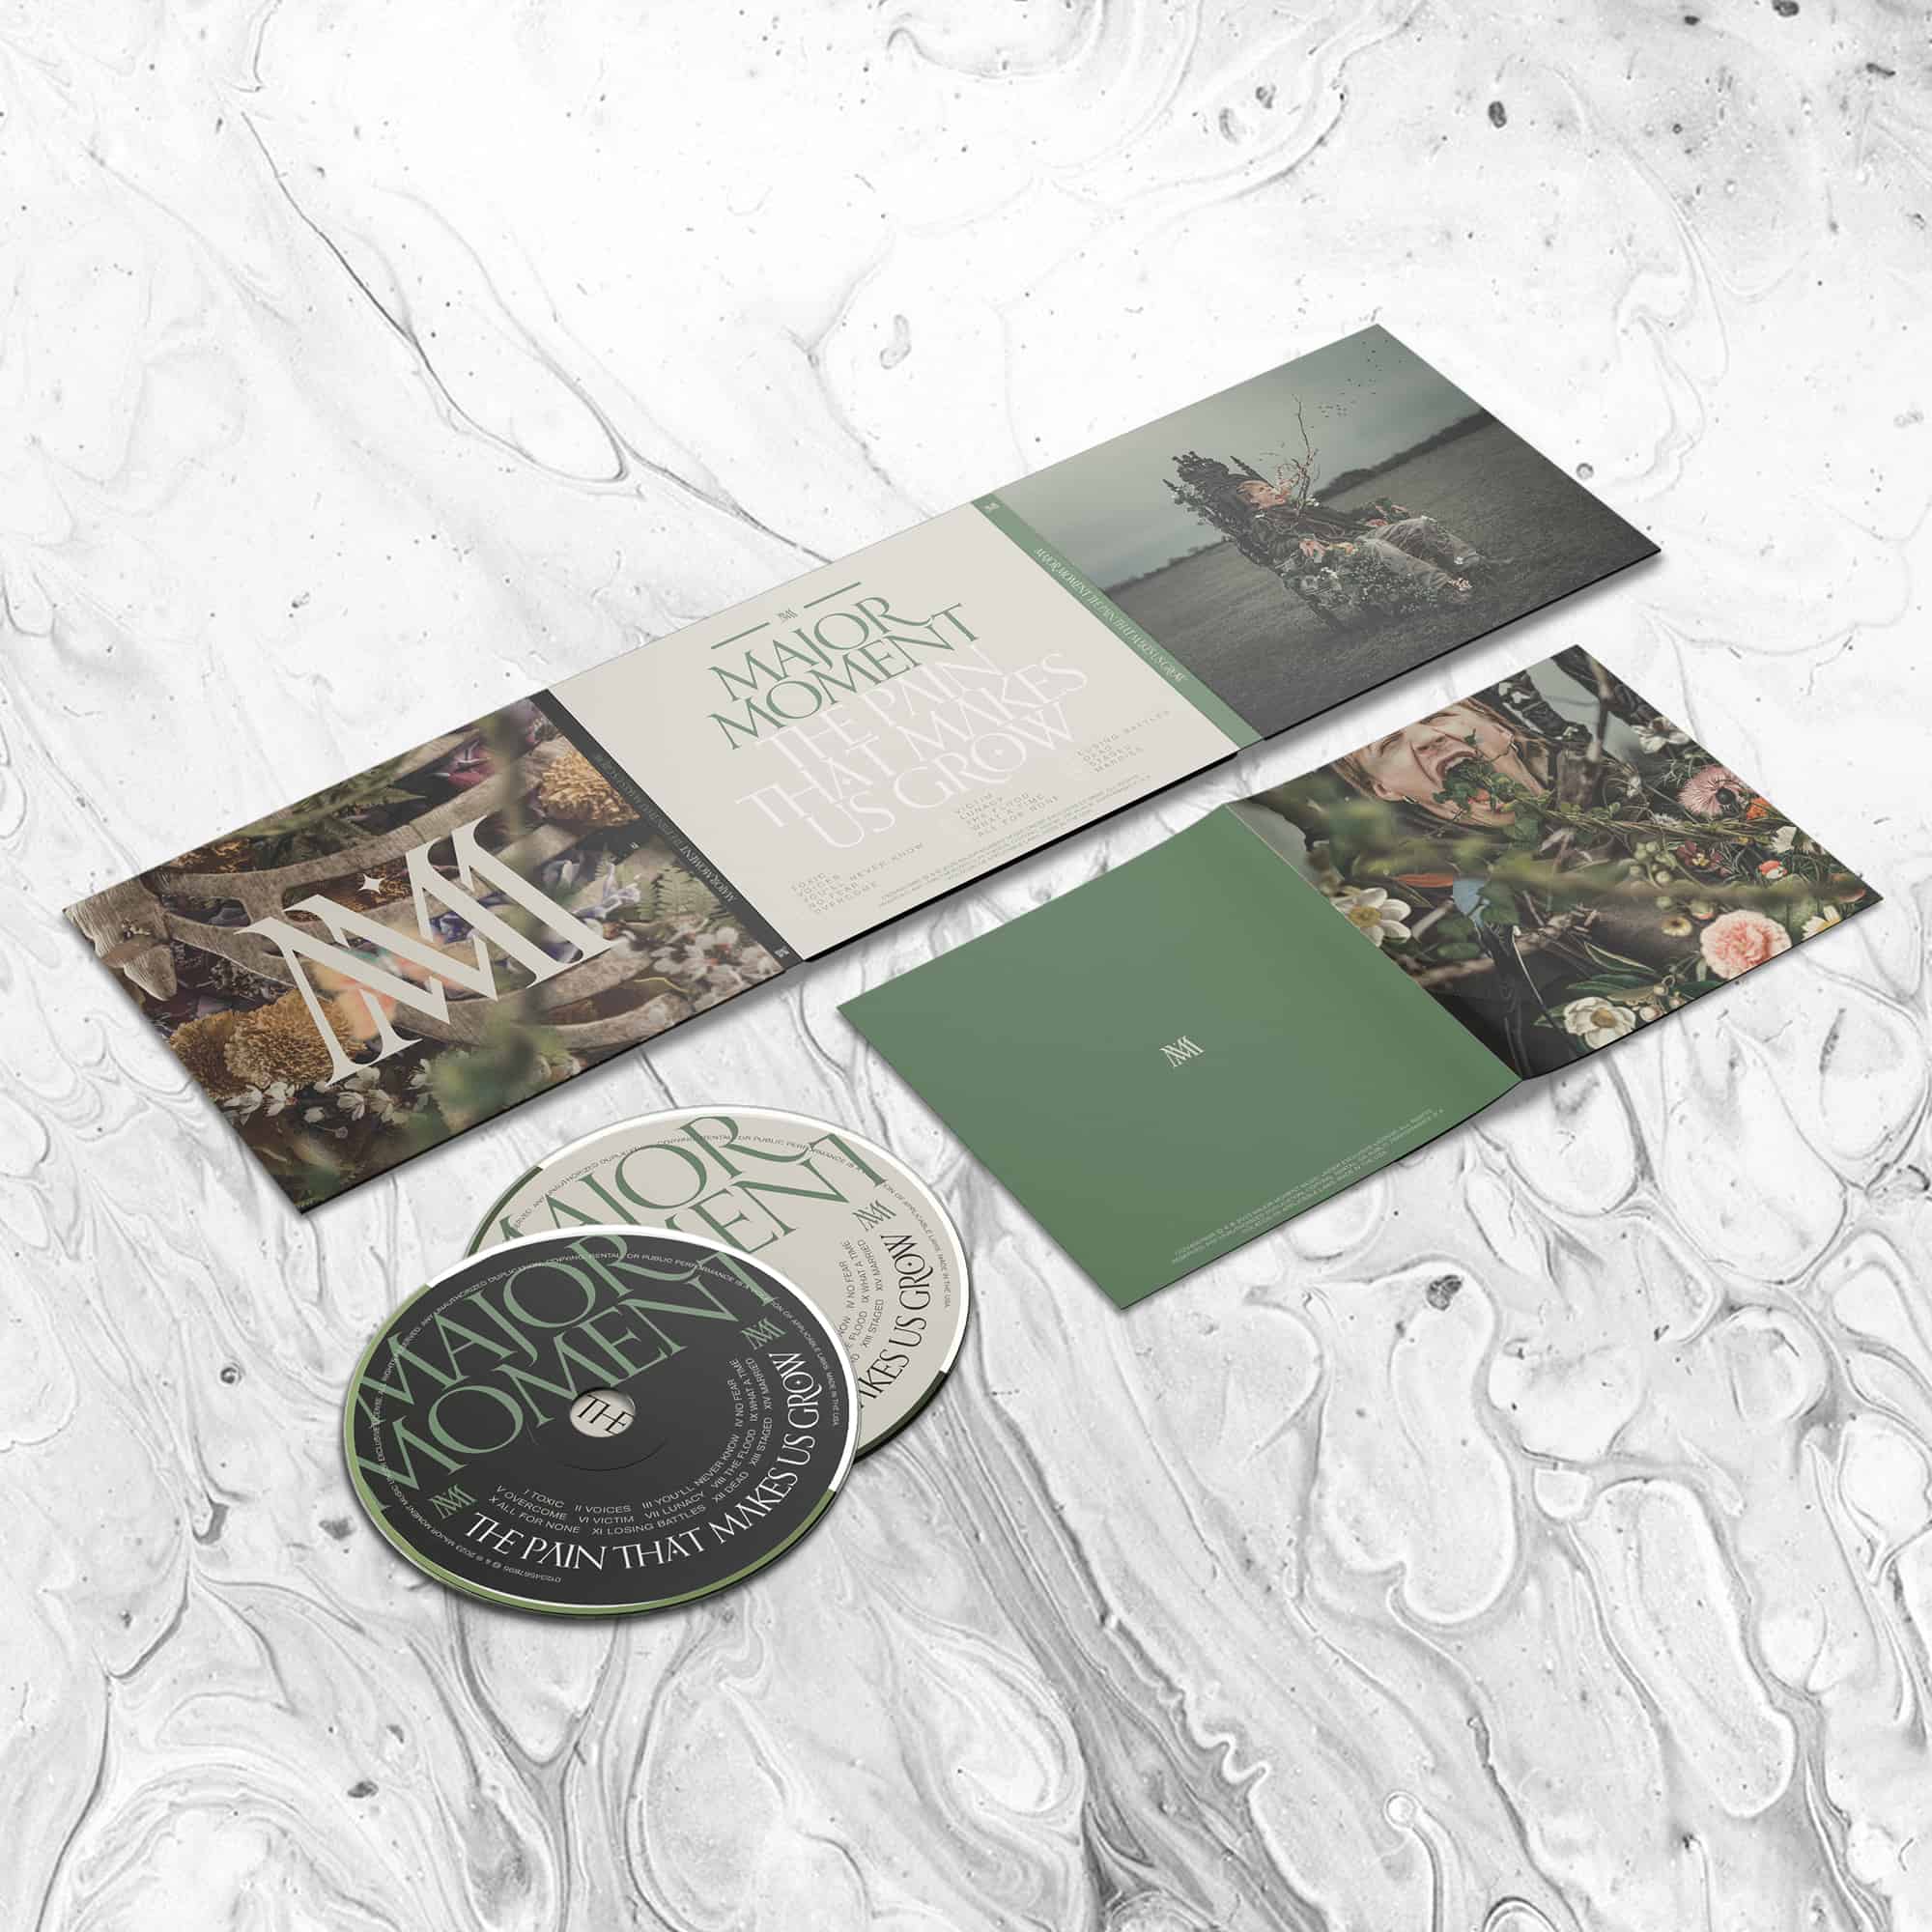 PRE-ORDER “The Pain That Makes Us Grow” Deluxe Double CD - MAJOR MOMENT